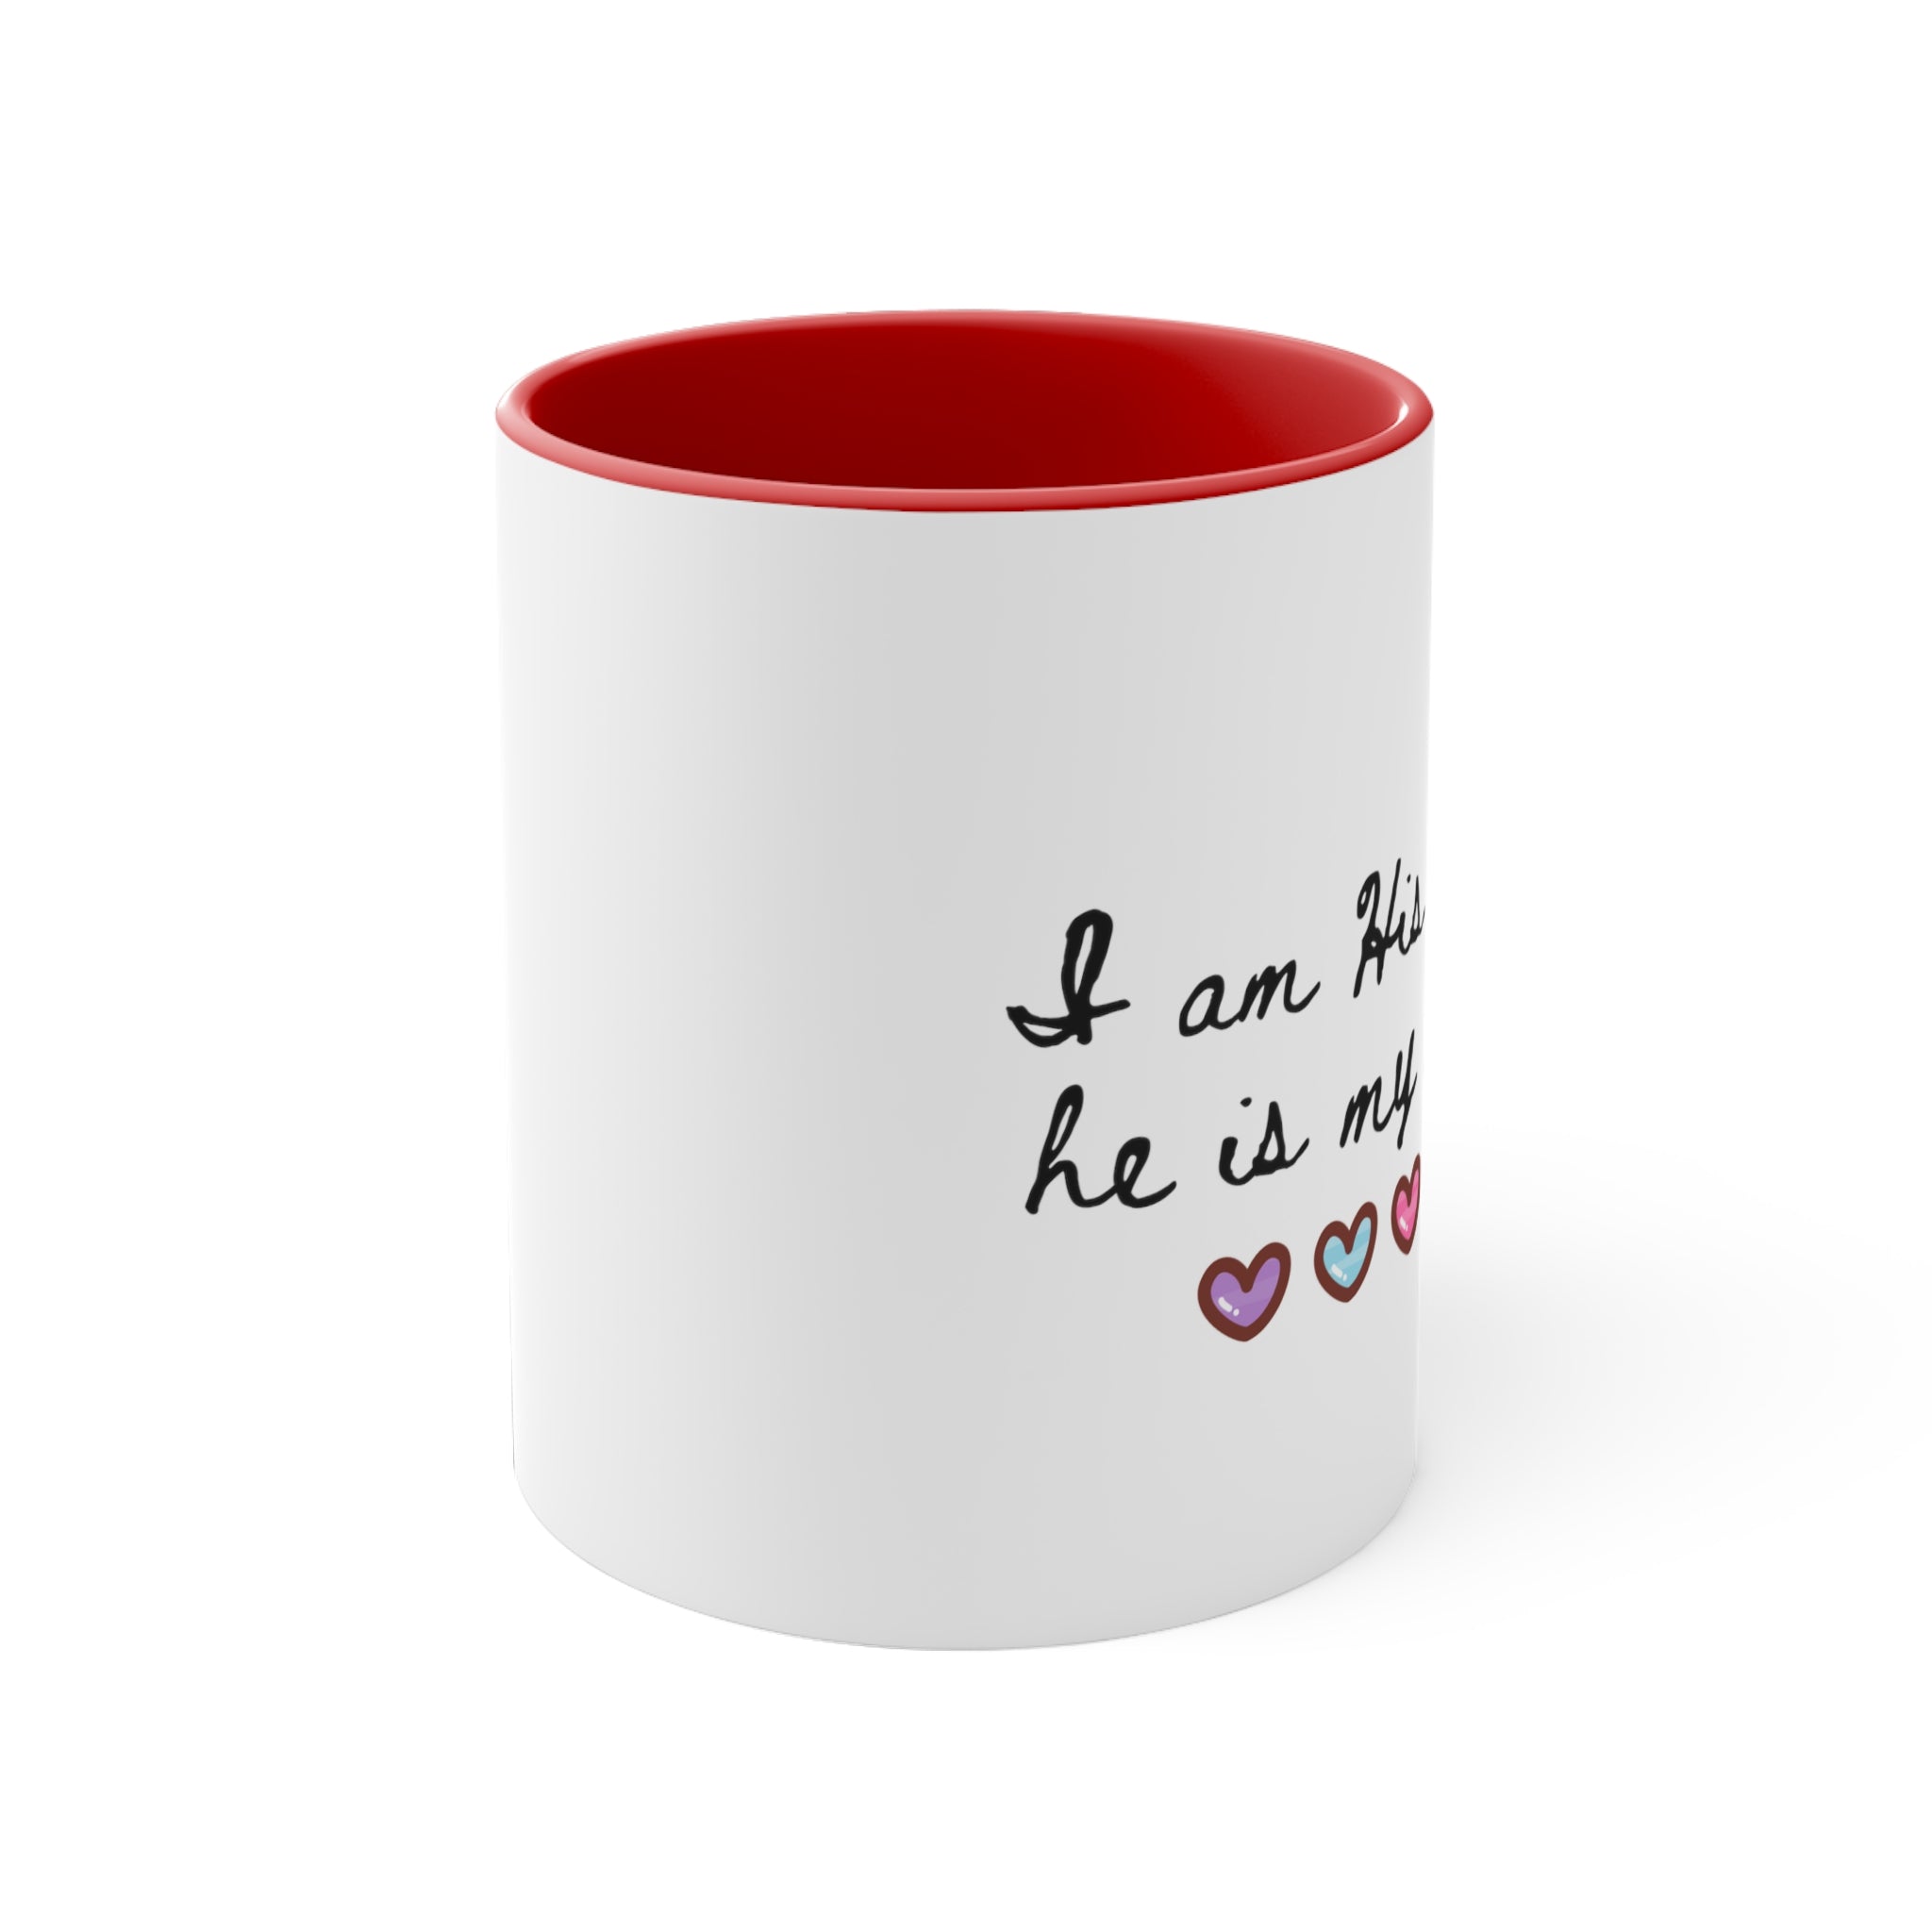 I am his voice, he is my heart, Mom Advocate 2 tone Accent Coffee Mug, 11oz